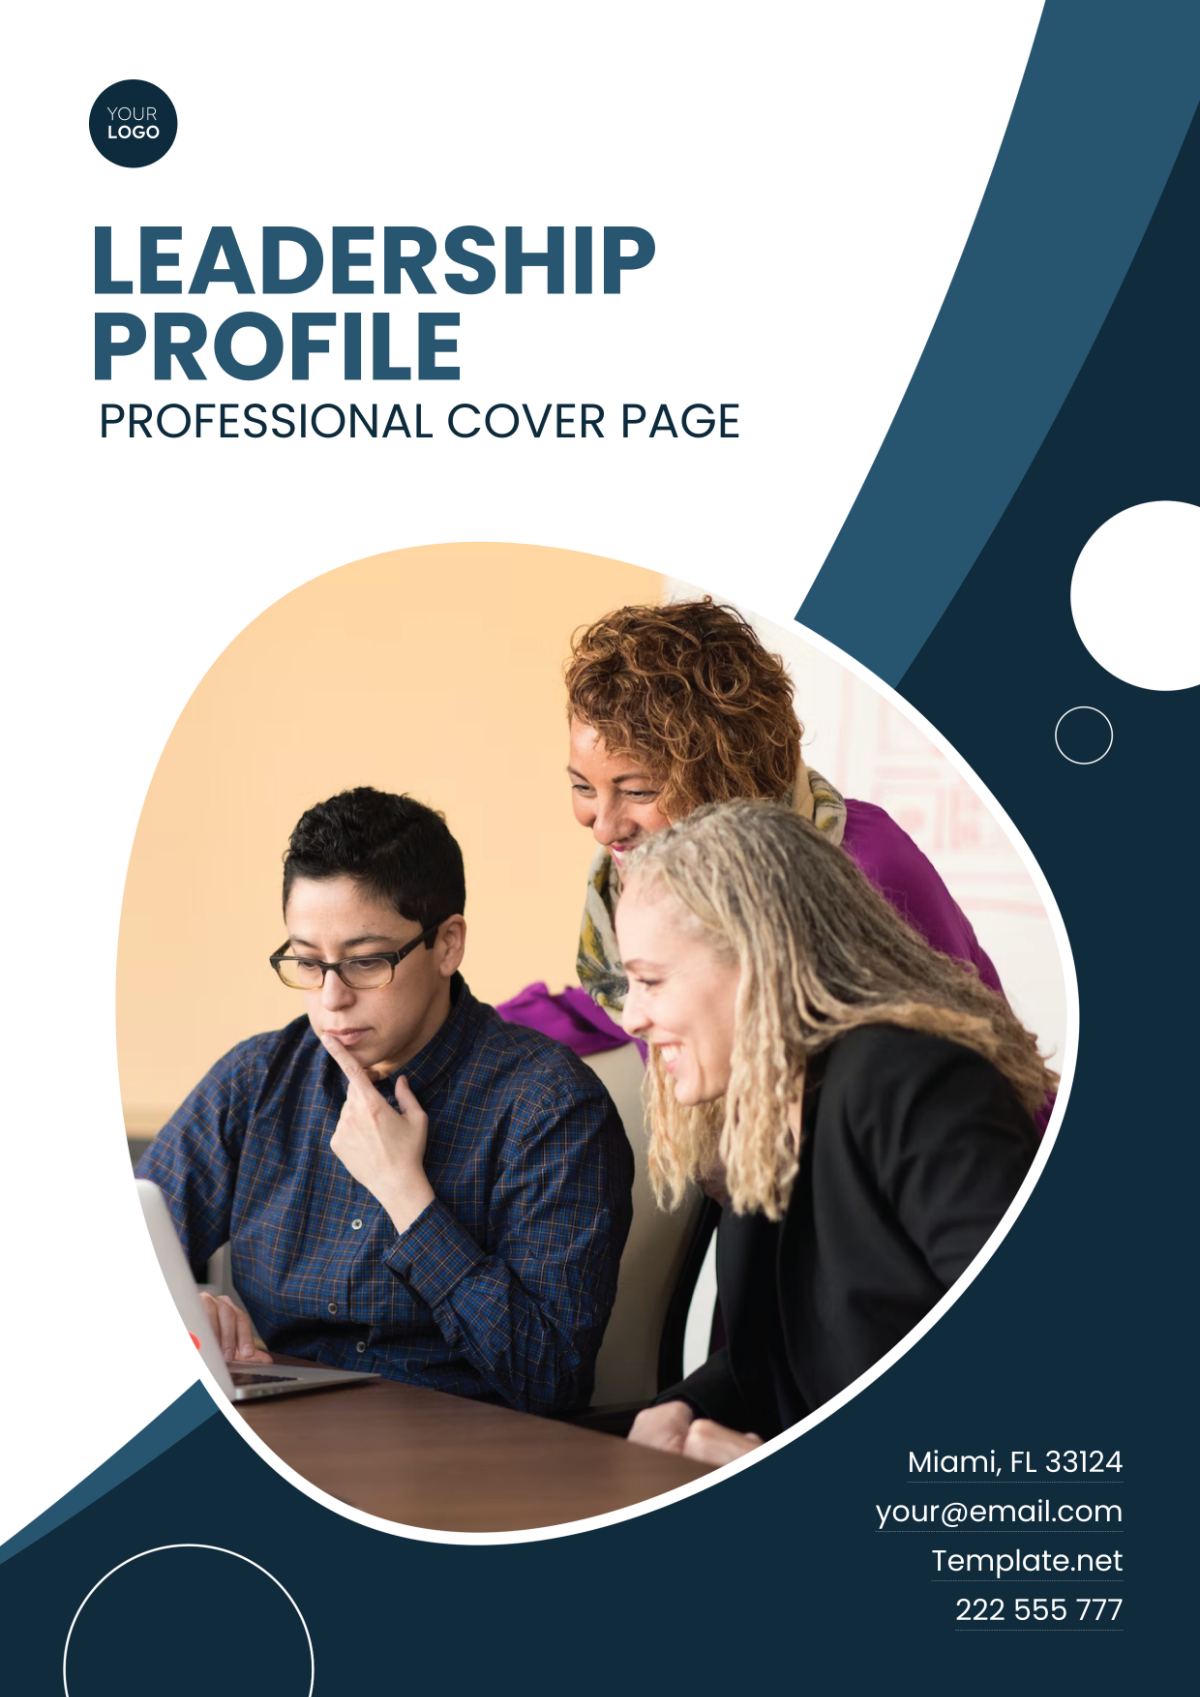 Leadership Profile Professional Cover Page Template